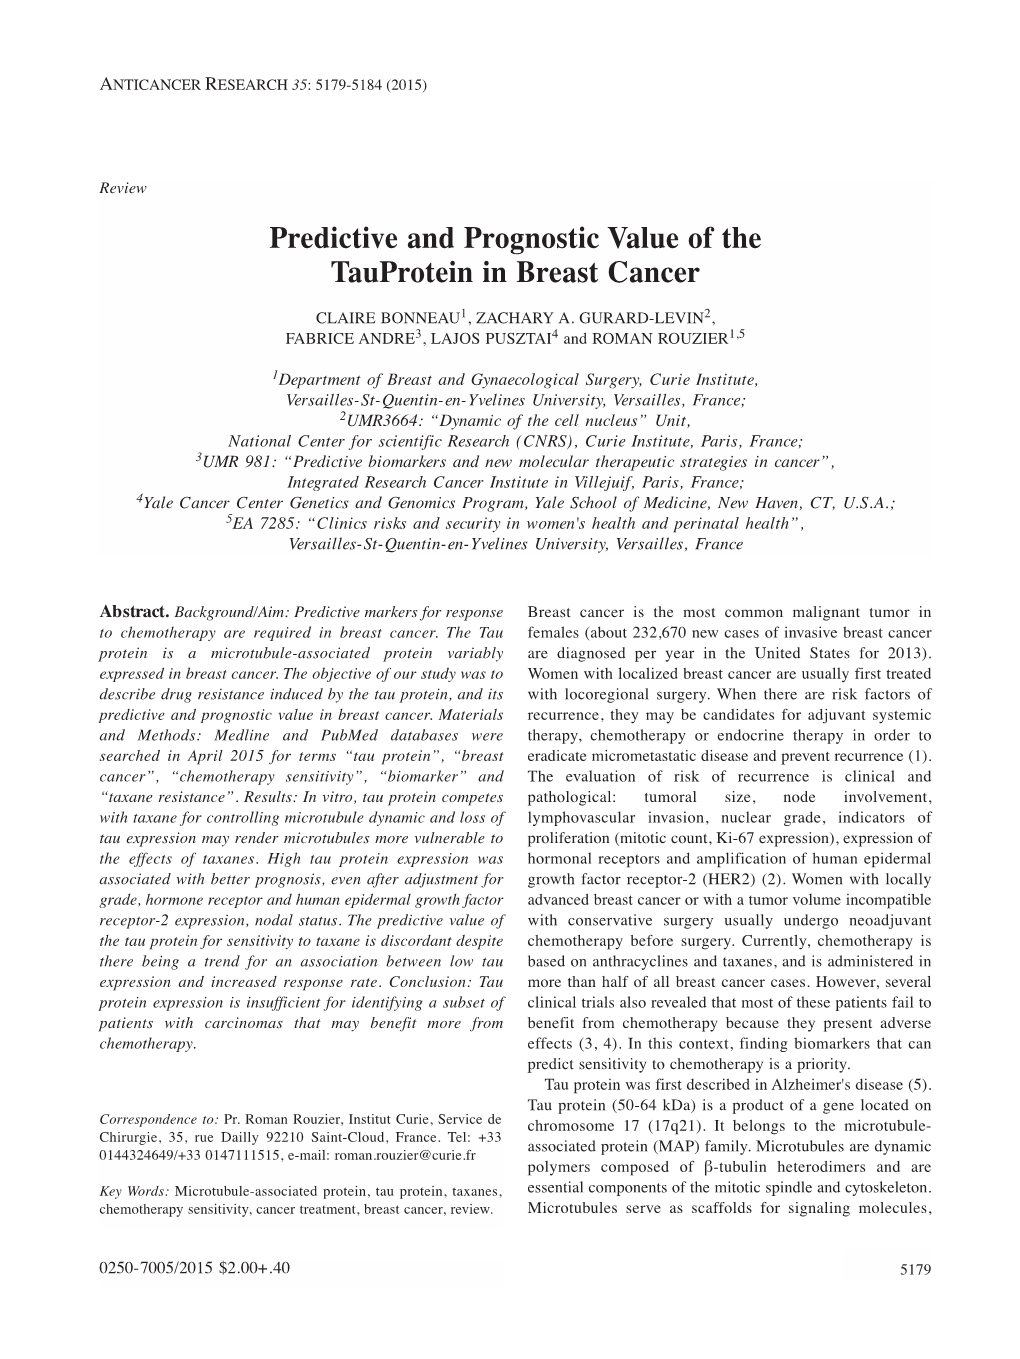 Predictive and Prognostic Value of the Tauprotein in Breast Cancer